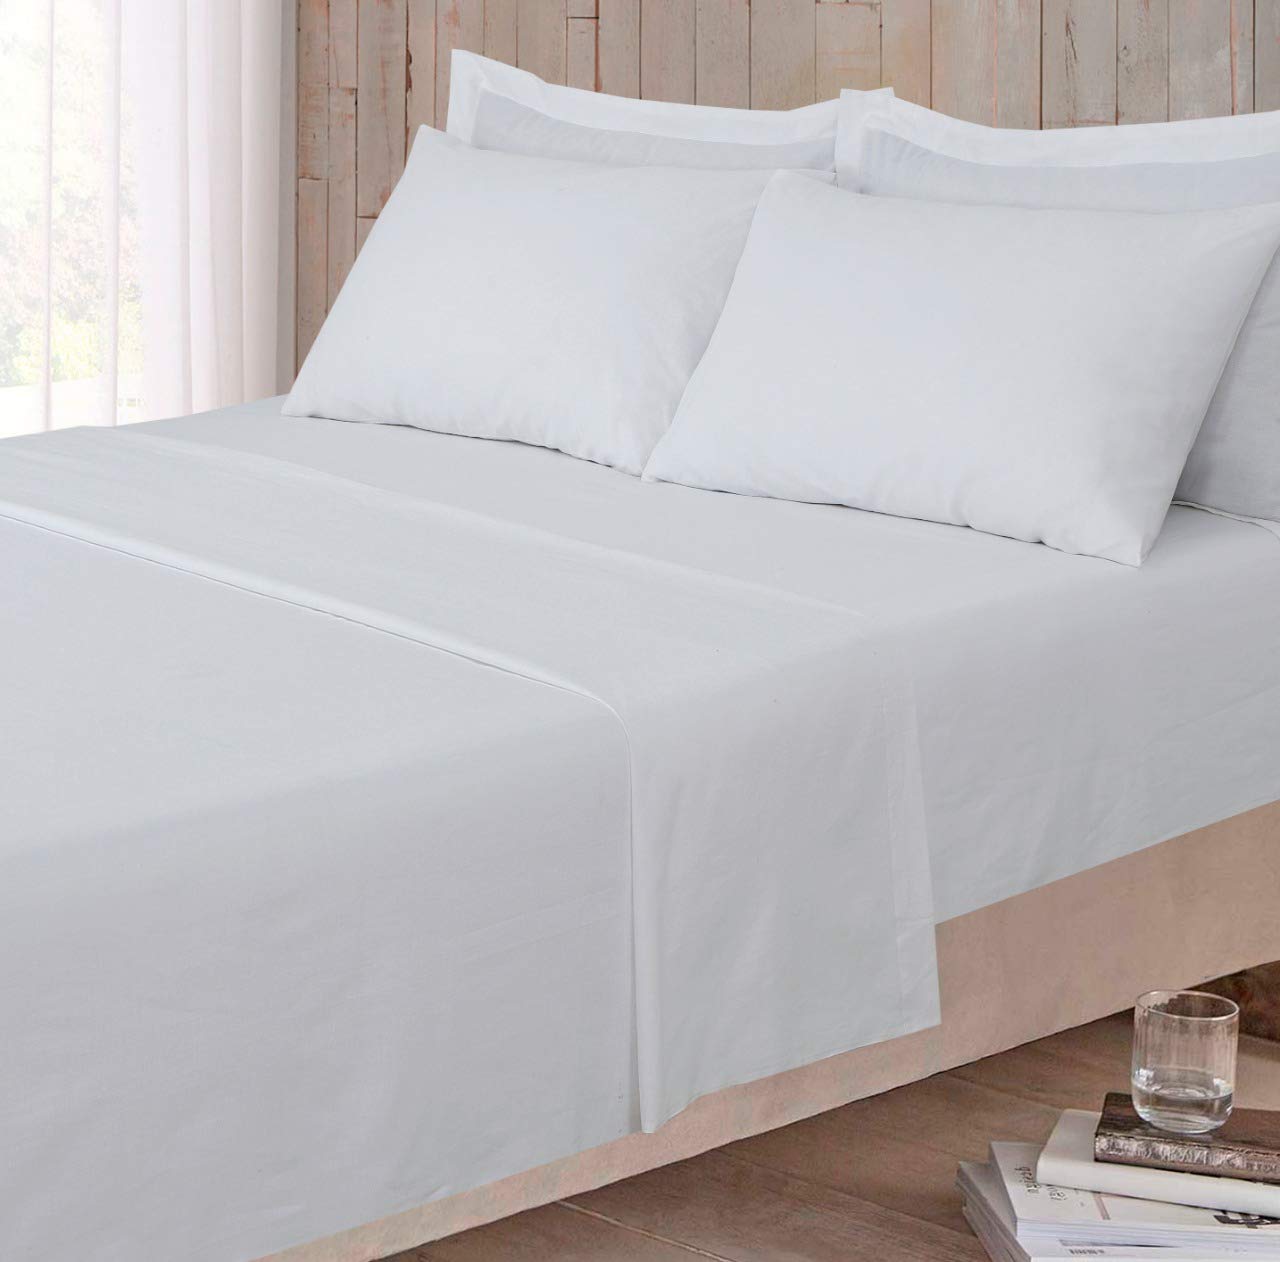 800 Thread Count - Flat Sheet - 100% Pure Egyptian Cotton Sateen Super Soft Hotel Quality Bedding - King - White